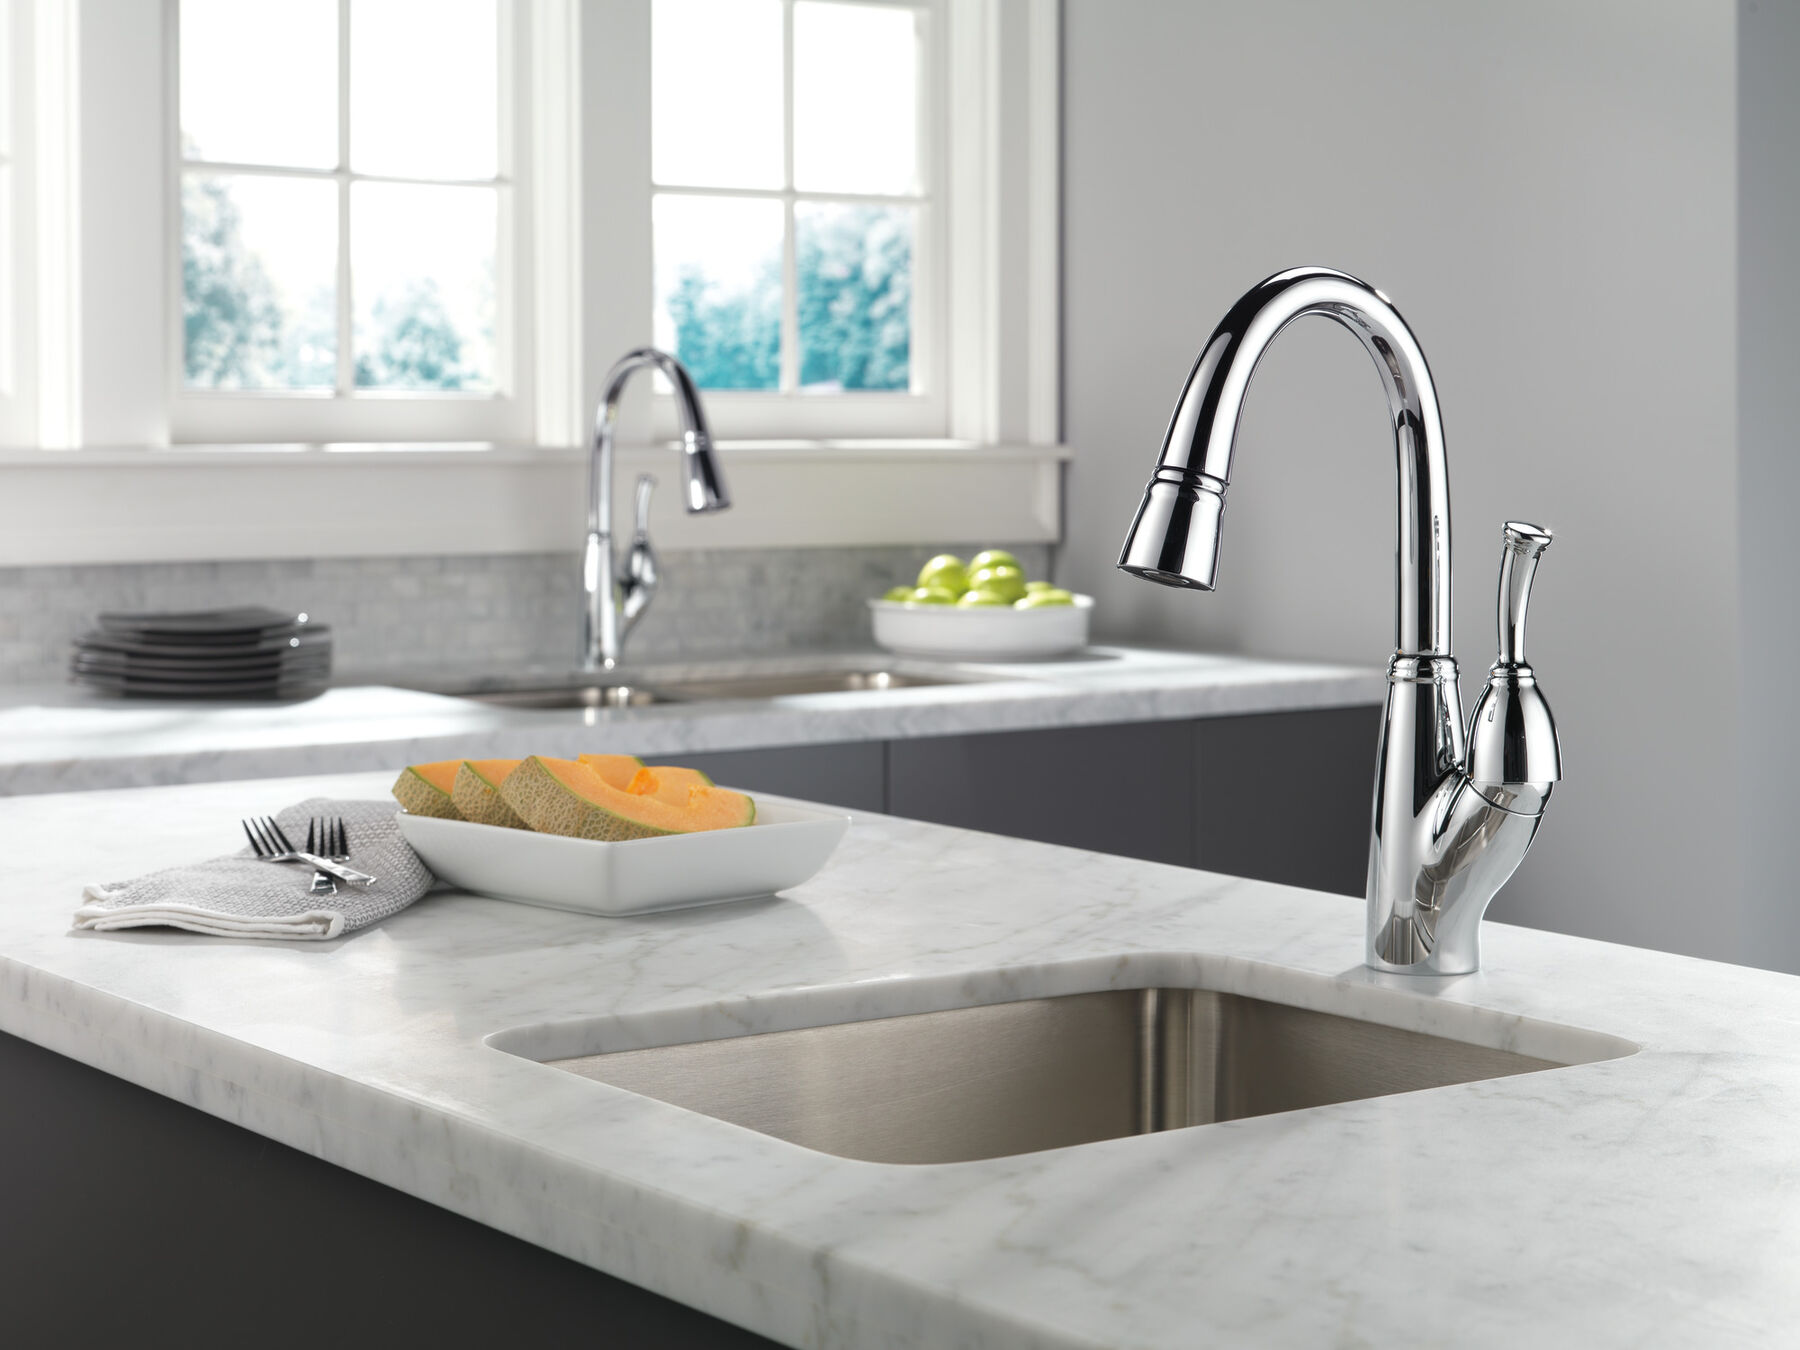 Kitchen Faucet In Chrome 989 Dst